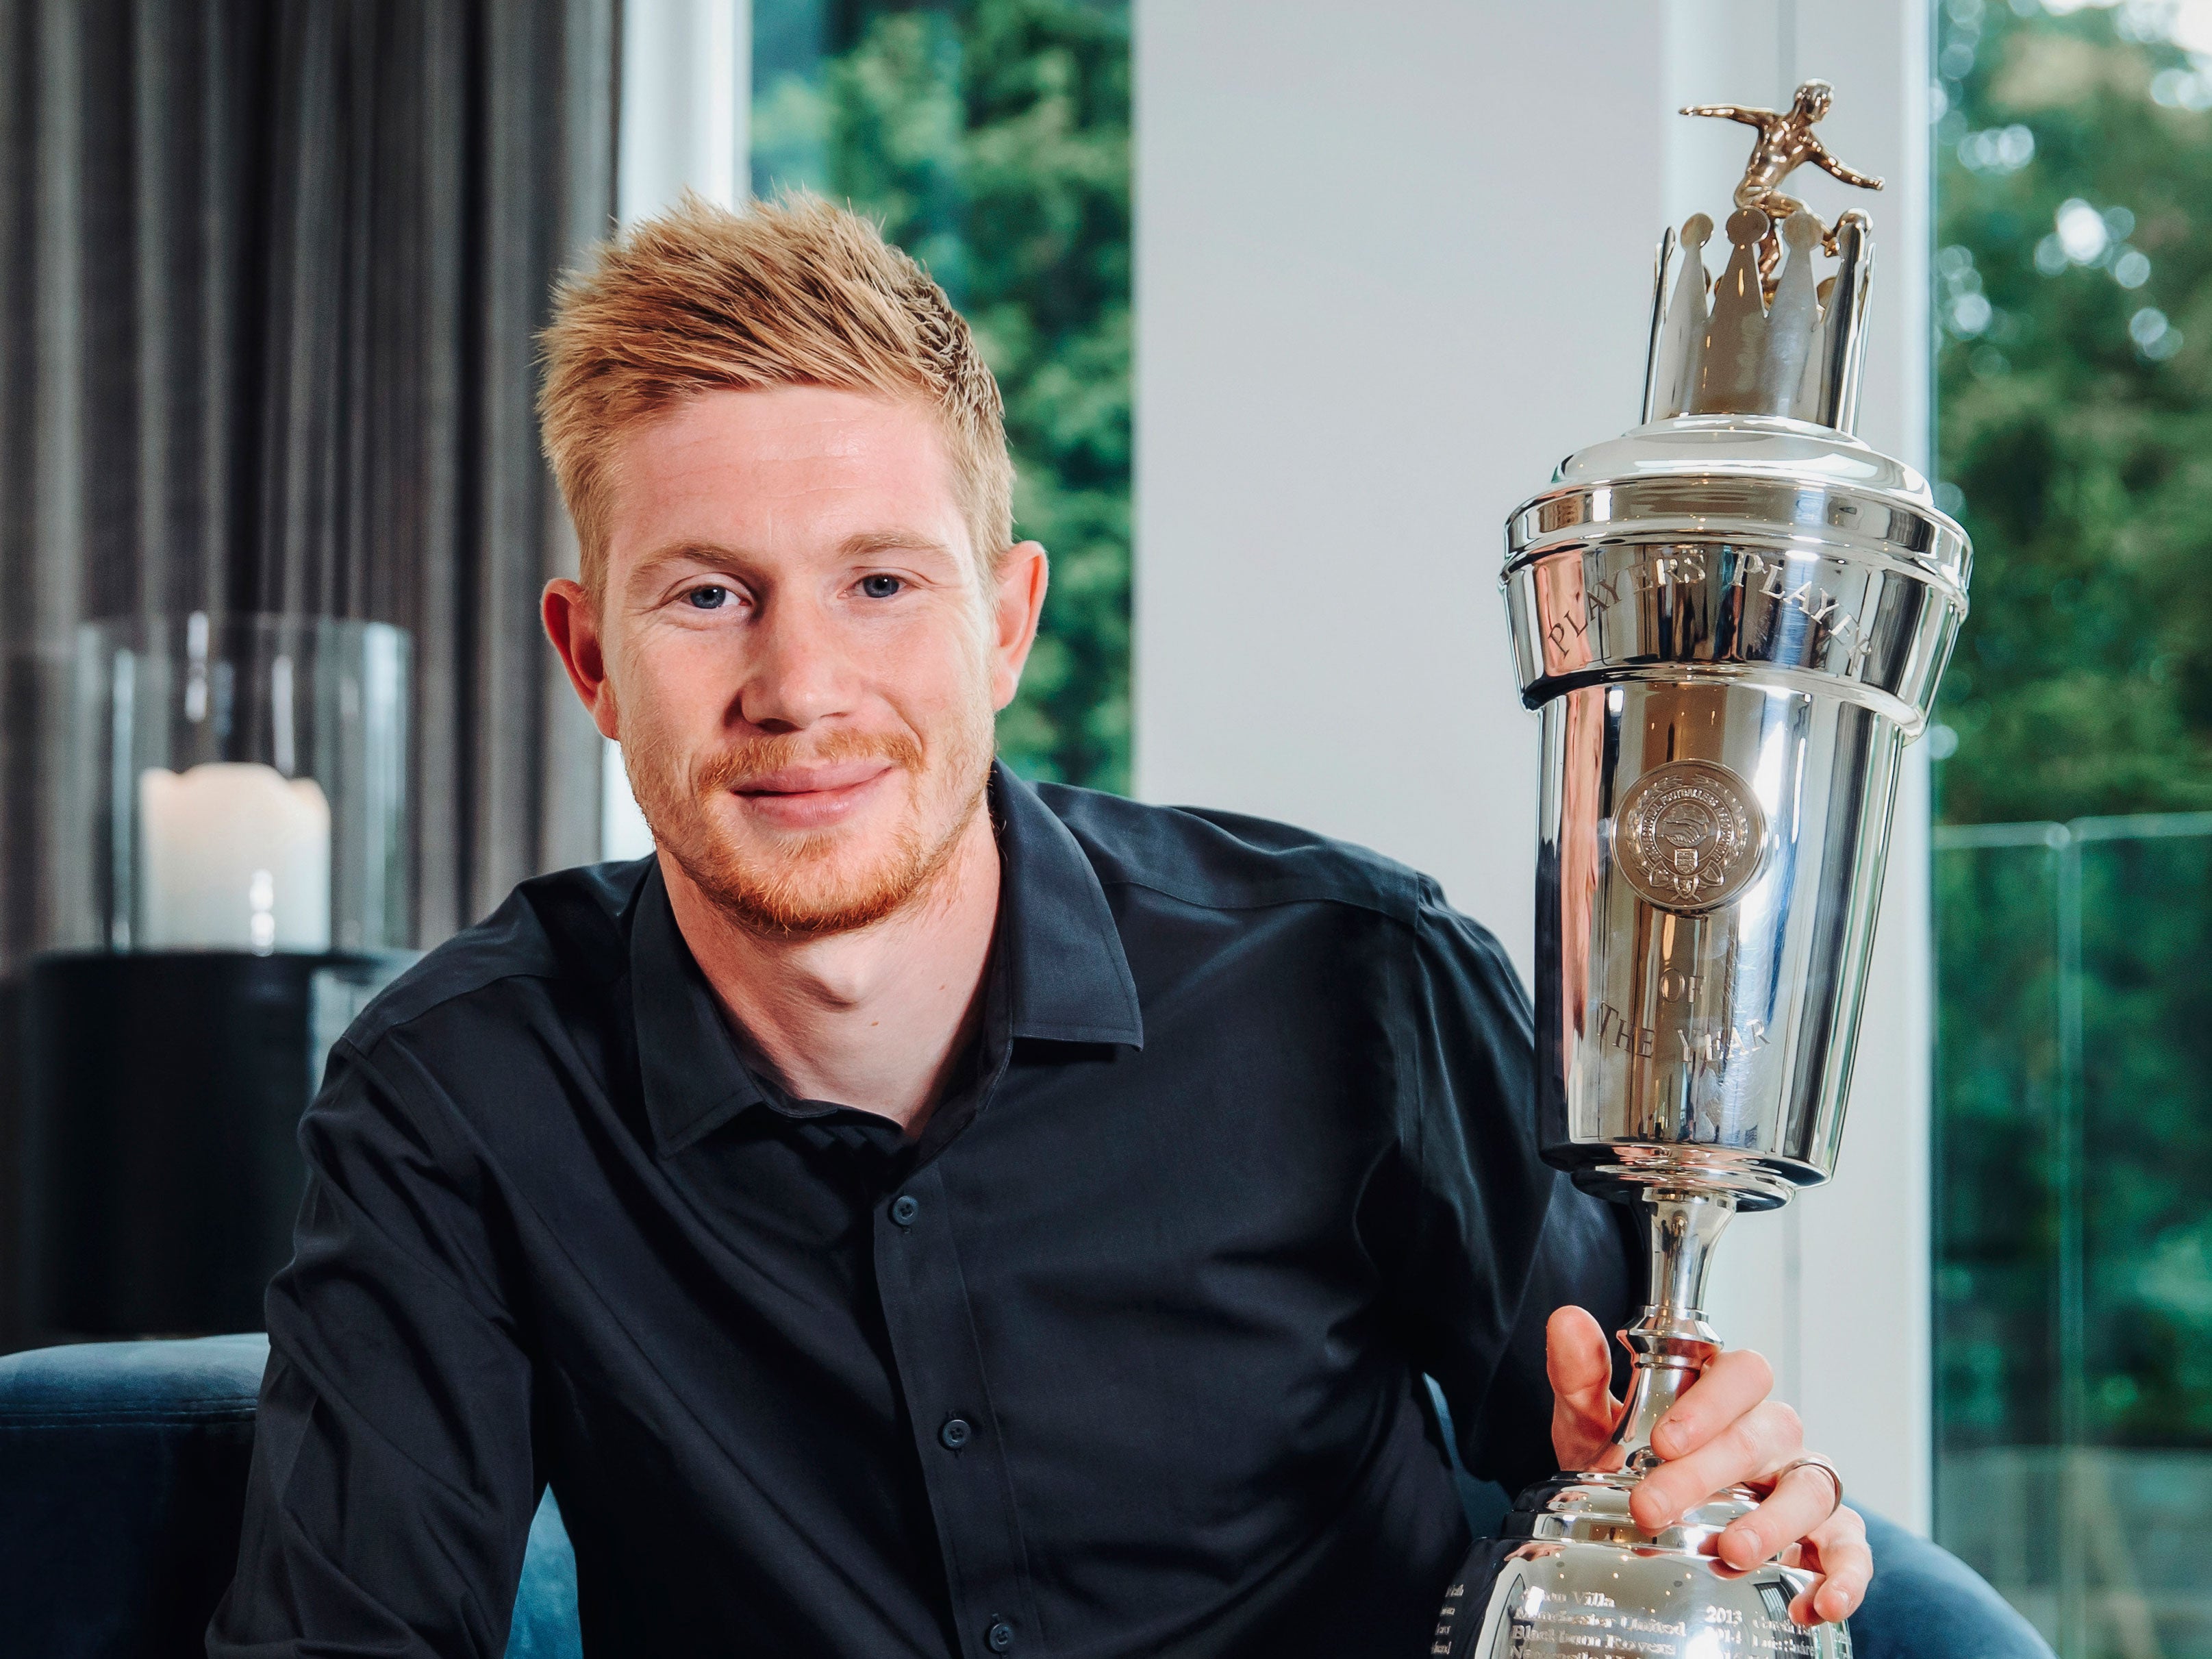 Manchester City's Kevin De Bruyne named PFA Player of the Year